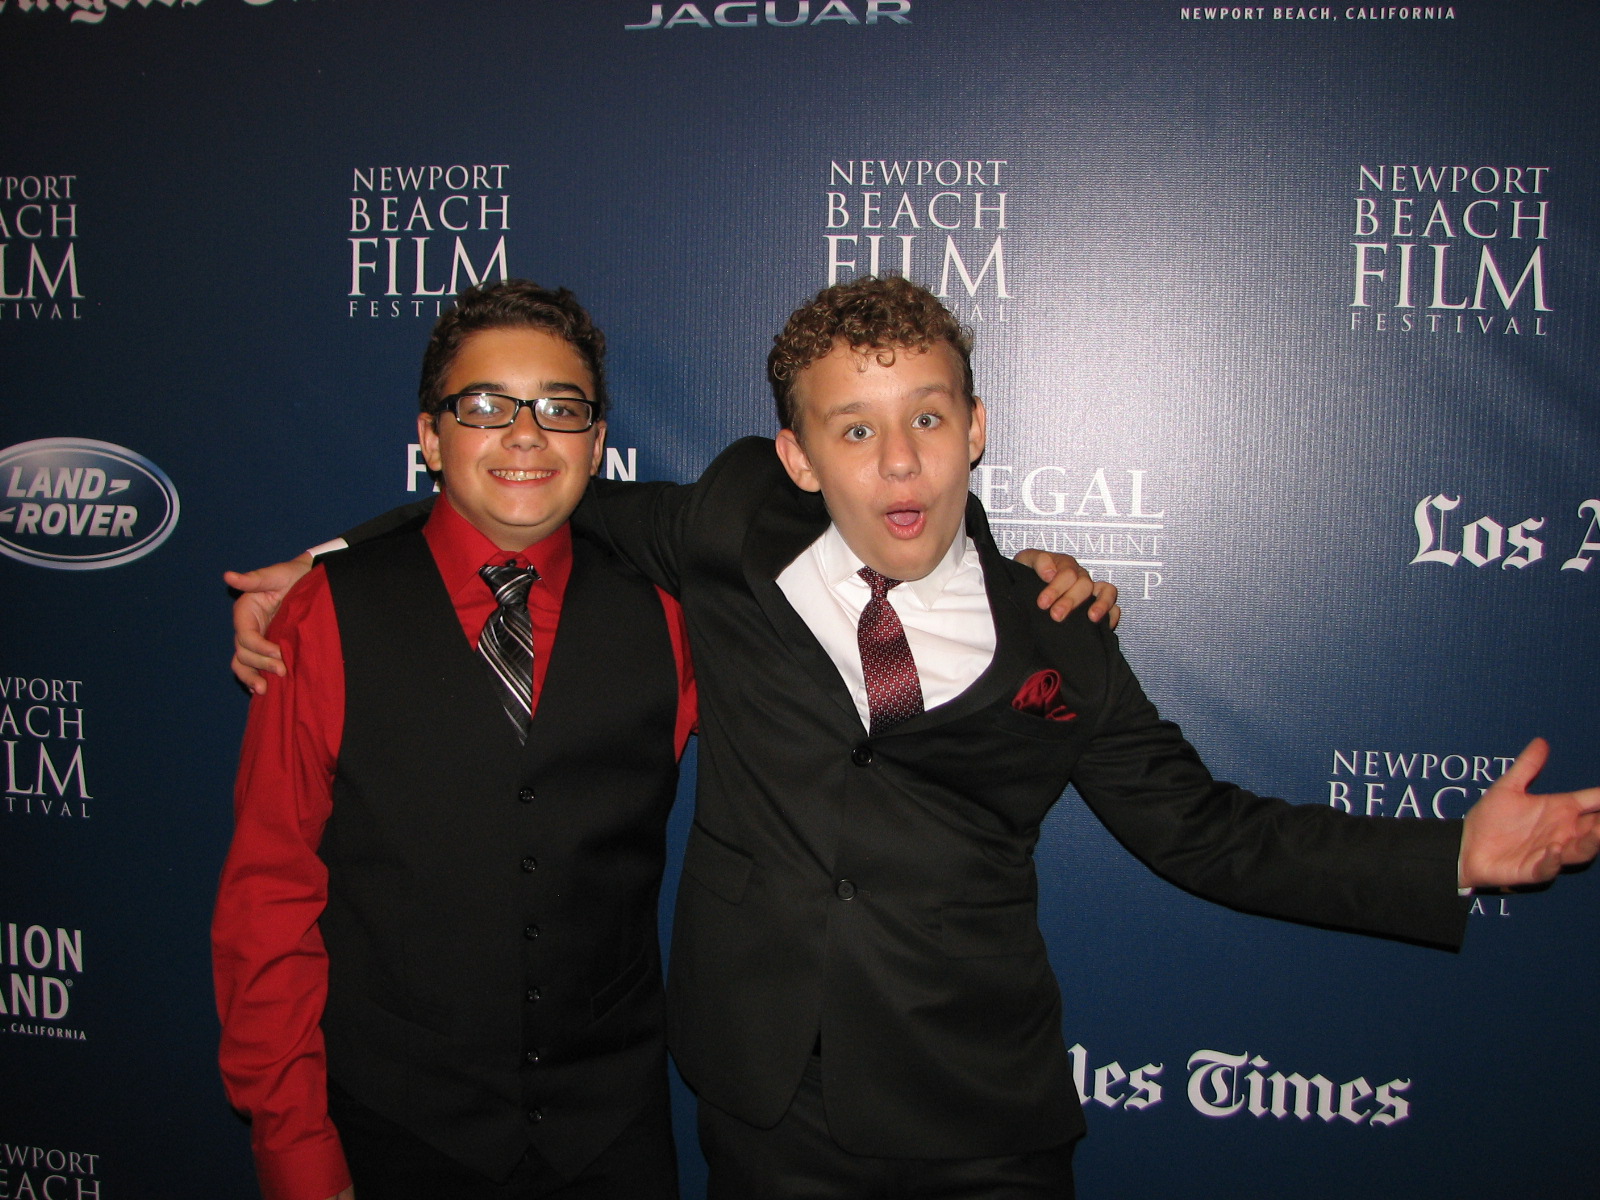 Fred Allen and Carsen Warner on the Red Carpet at the Newport Beach Film Festival for the festival opening film LOVESICK.